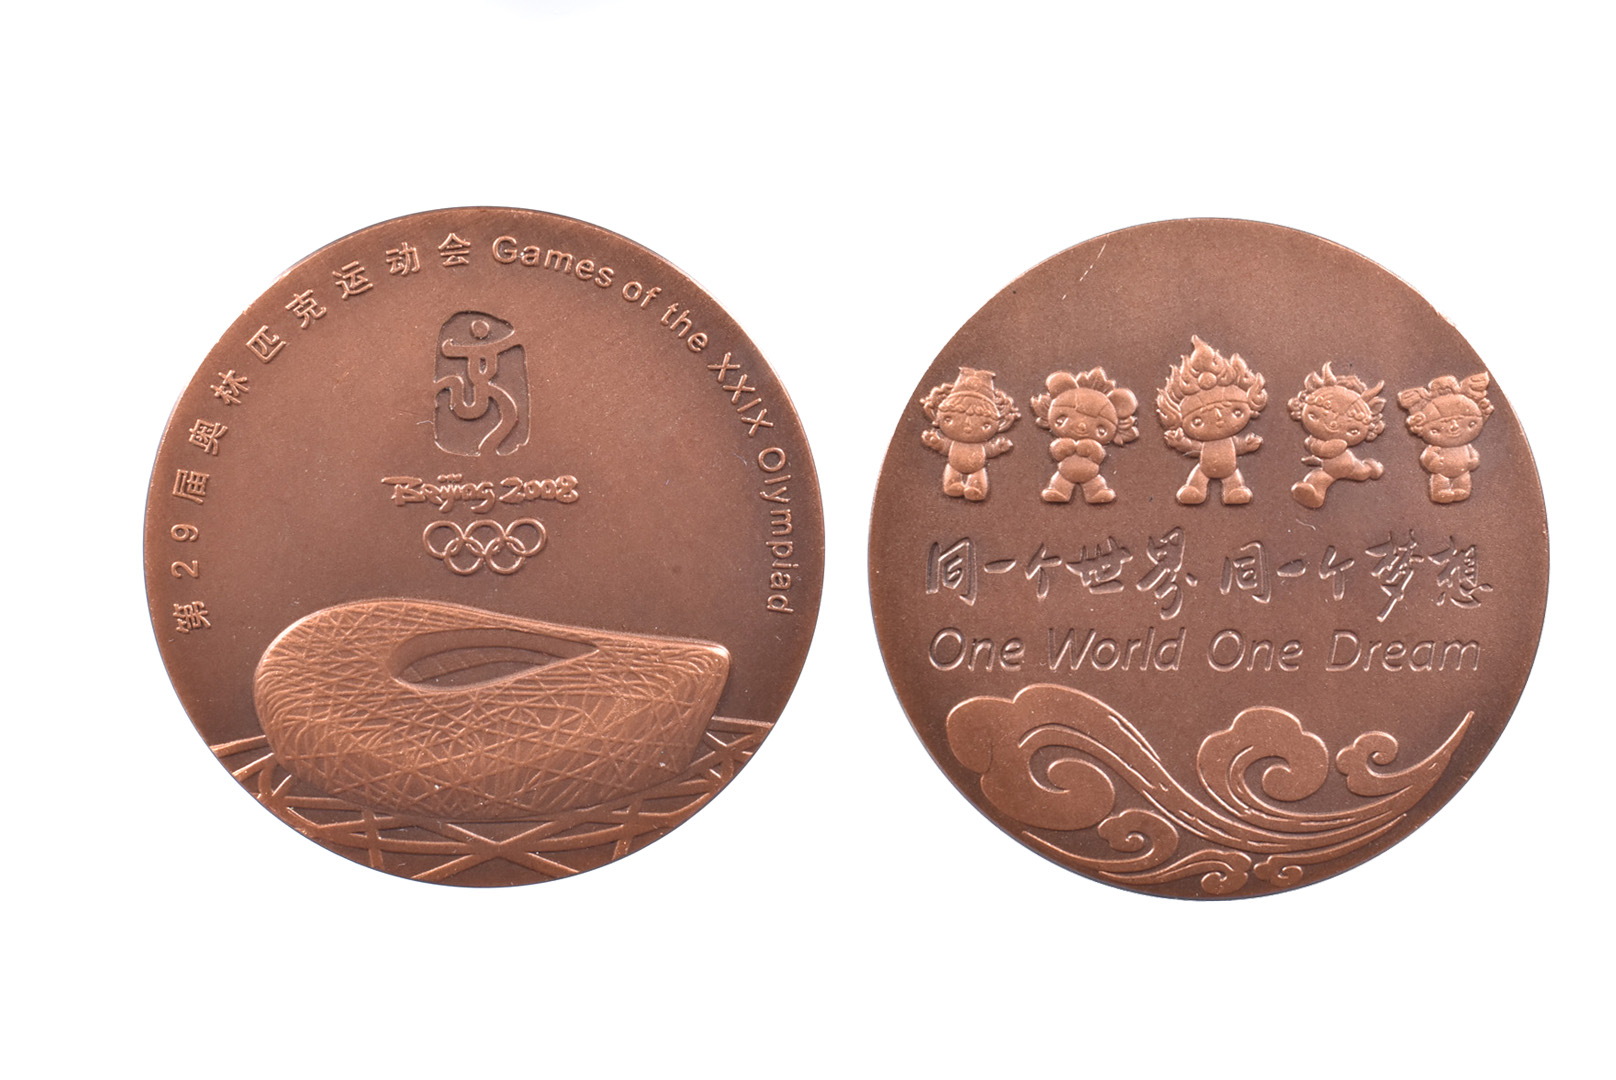 2008 Beijing Olympic Participation medal, with logo over Bird's Nest Olympic Stadium to the front,